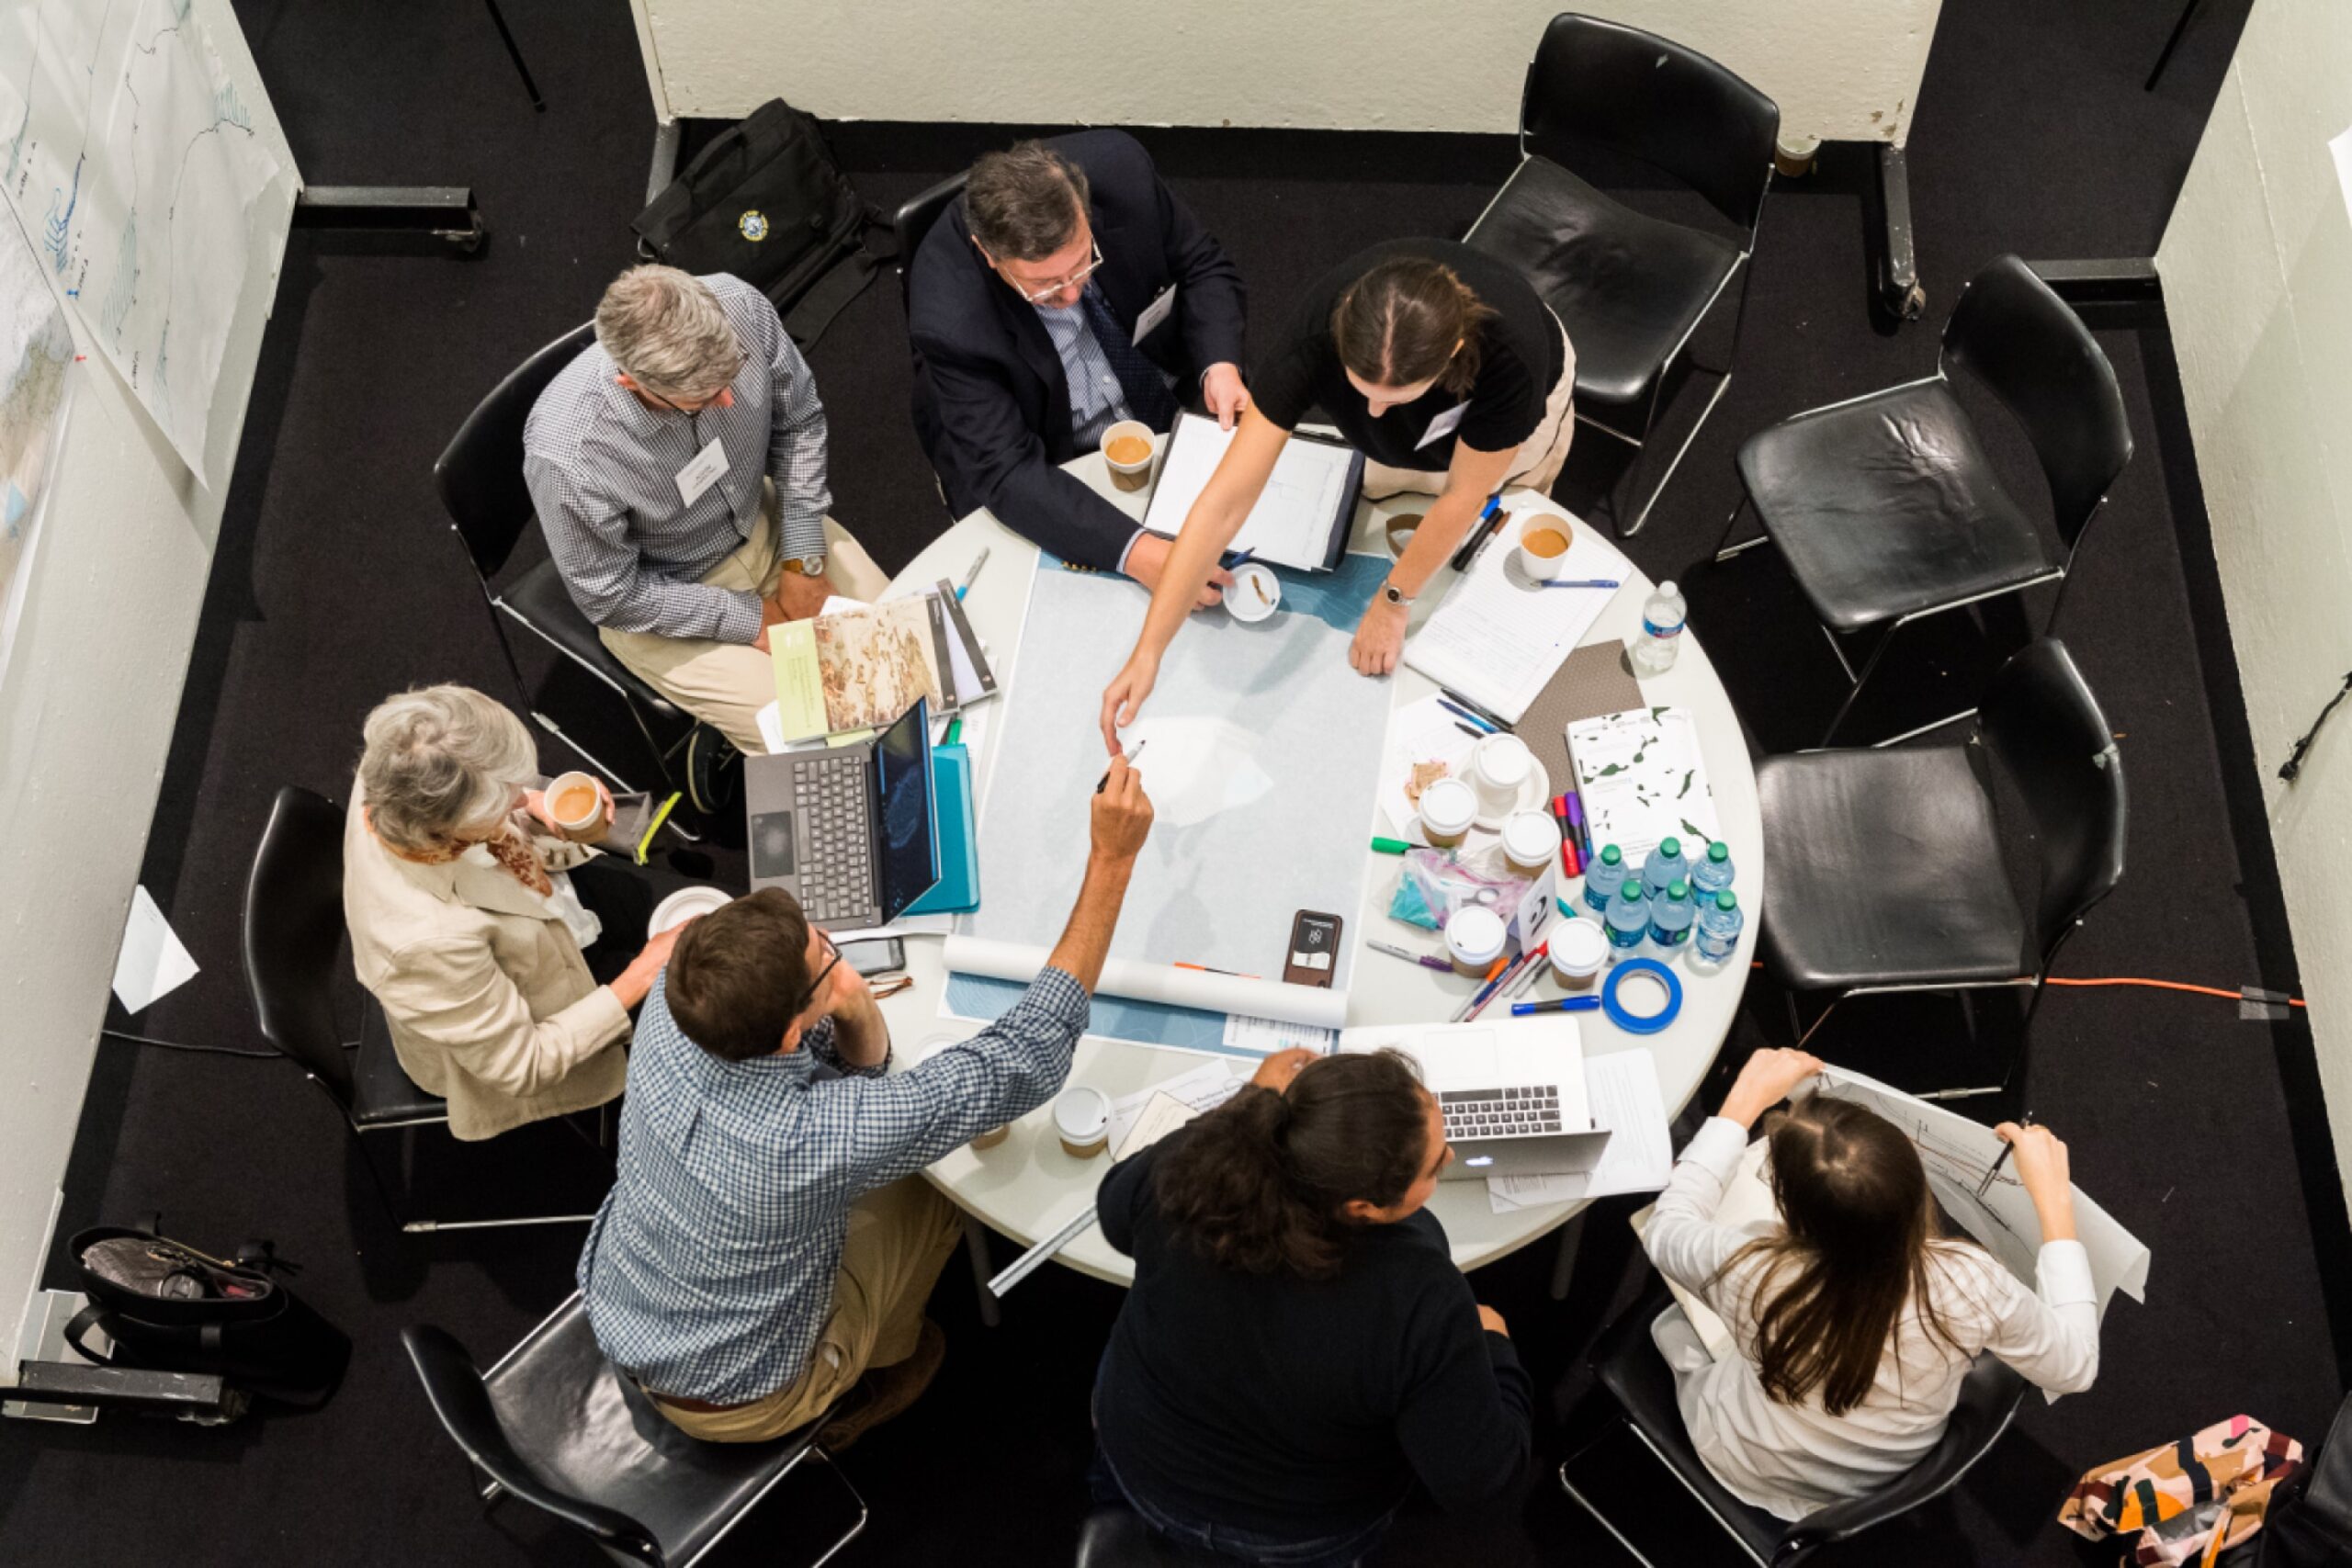 Seven people sitting at a round table brainstorming and drafting a plan.